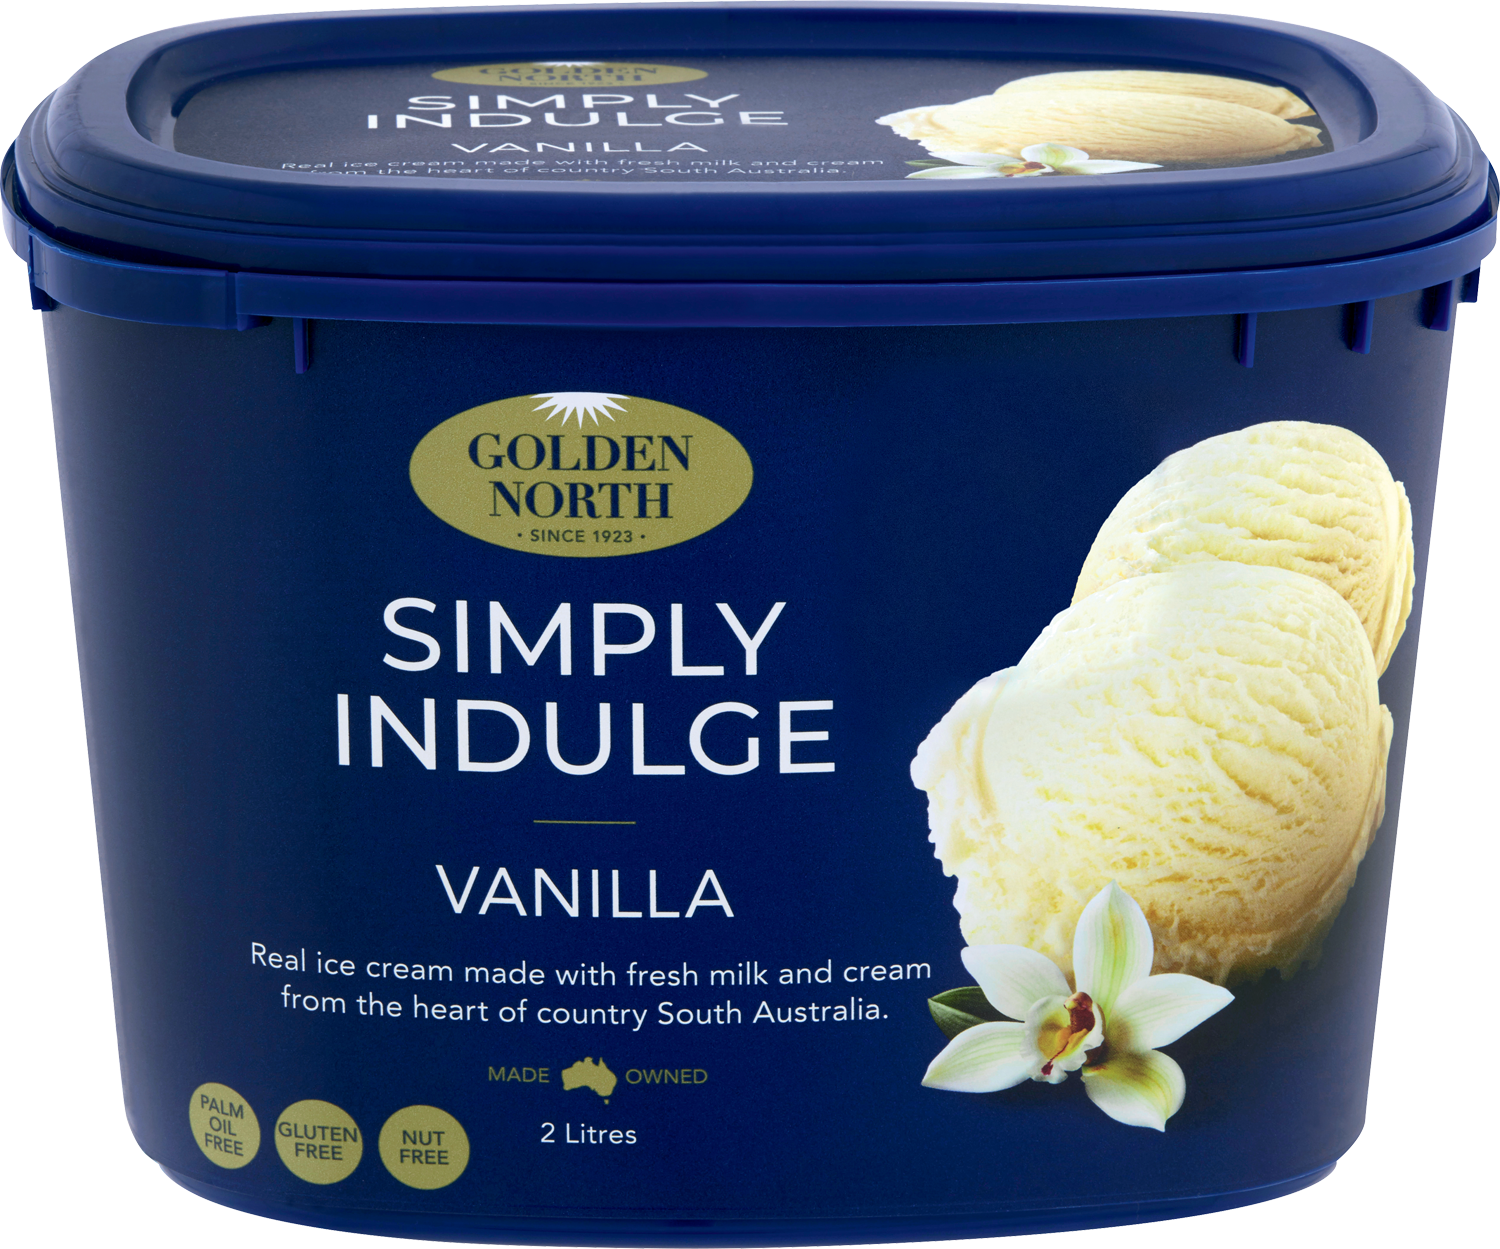 Golden North Take Home Tubs of Ice Cream